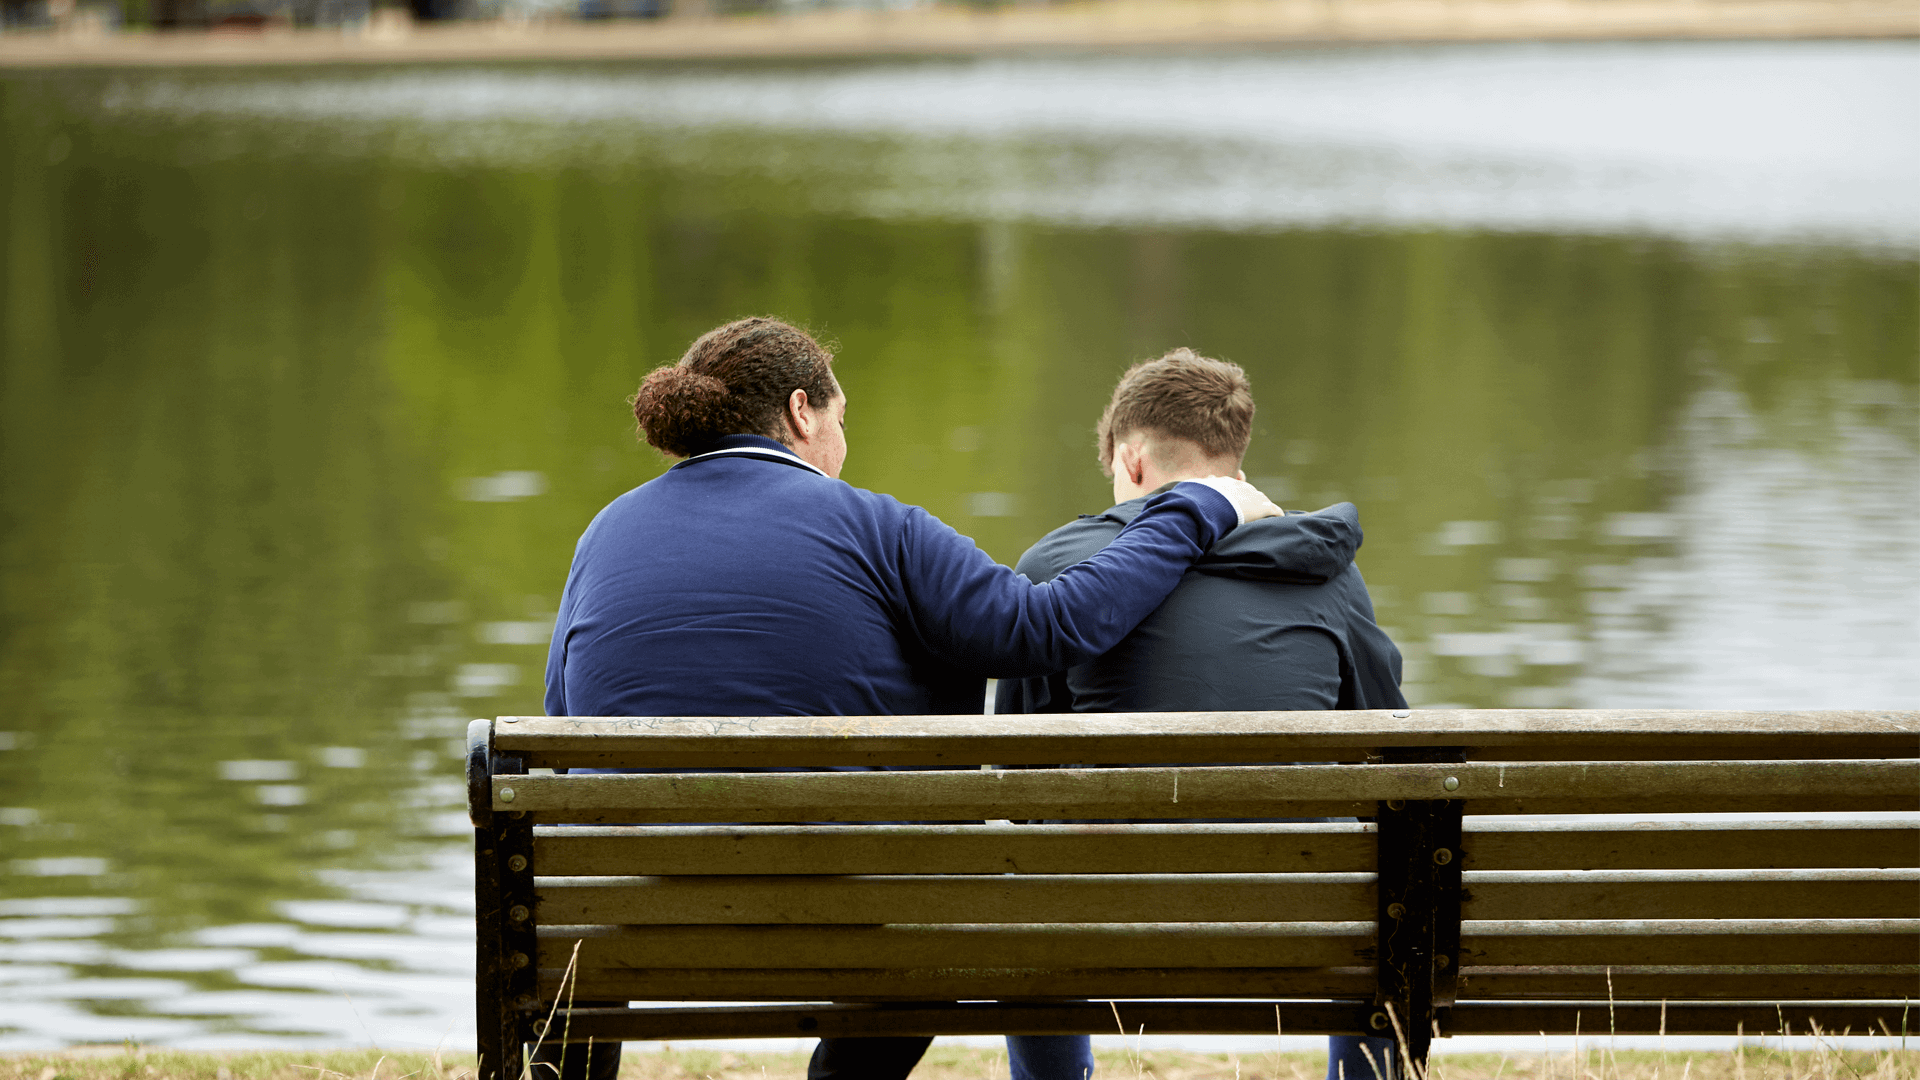 Two young people sitting on a bench in a park, one has their arm around the other.